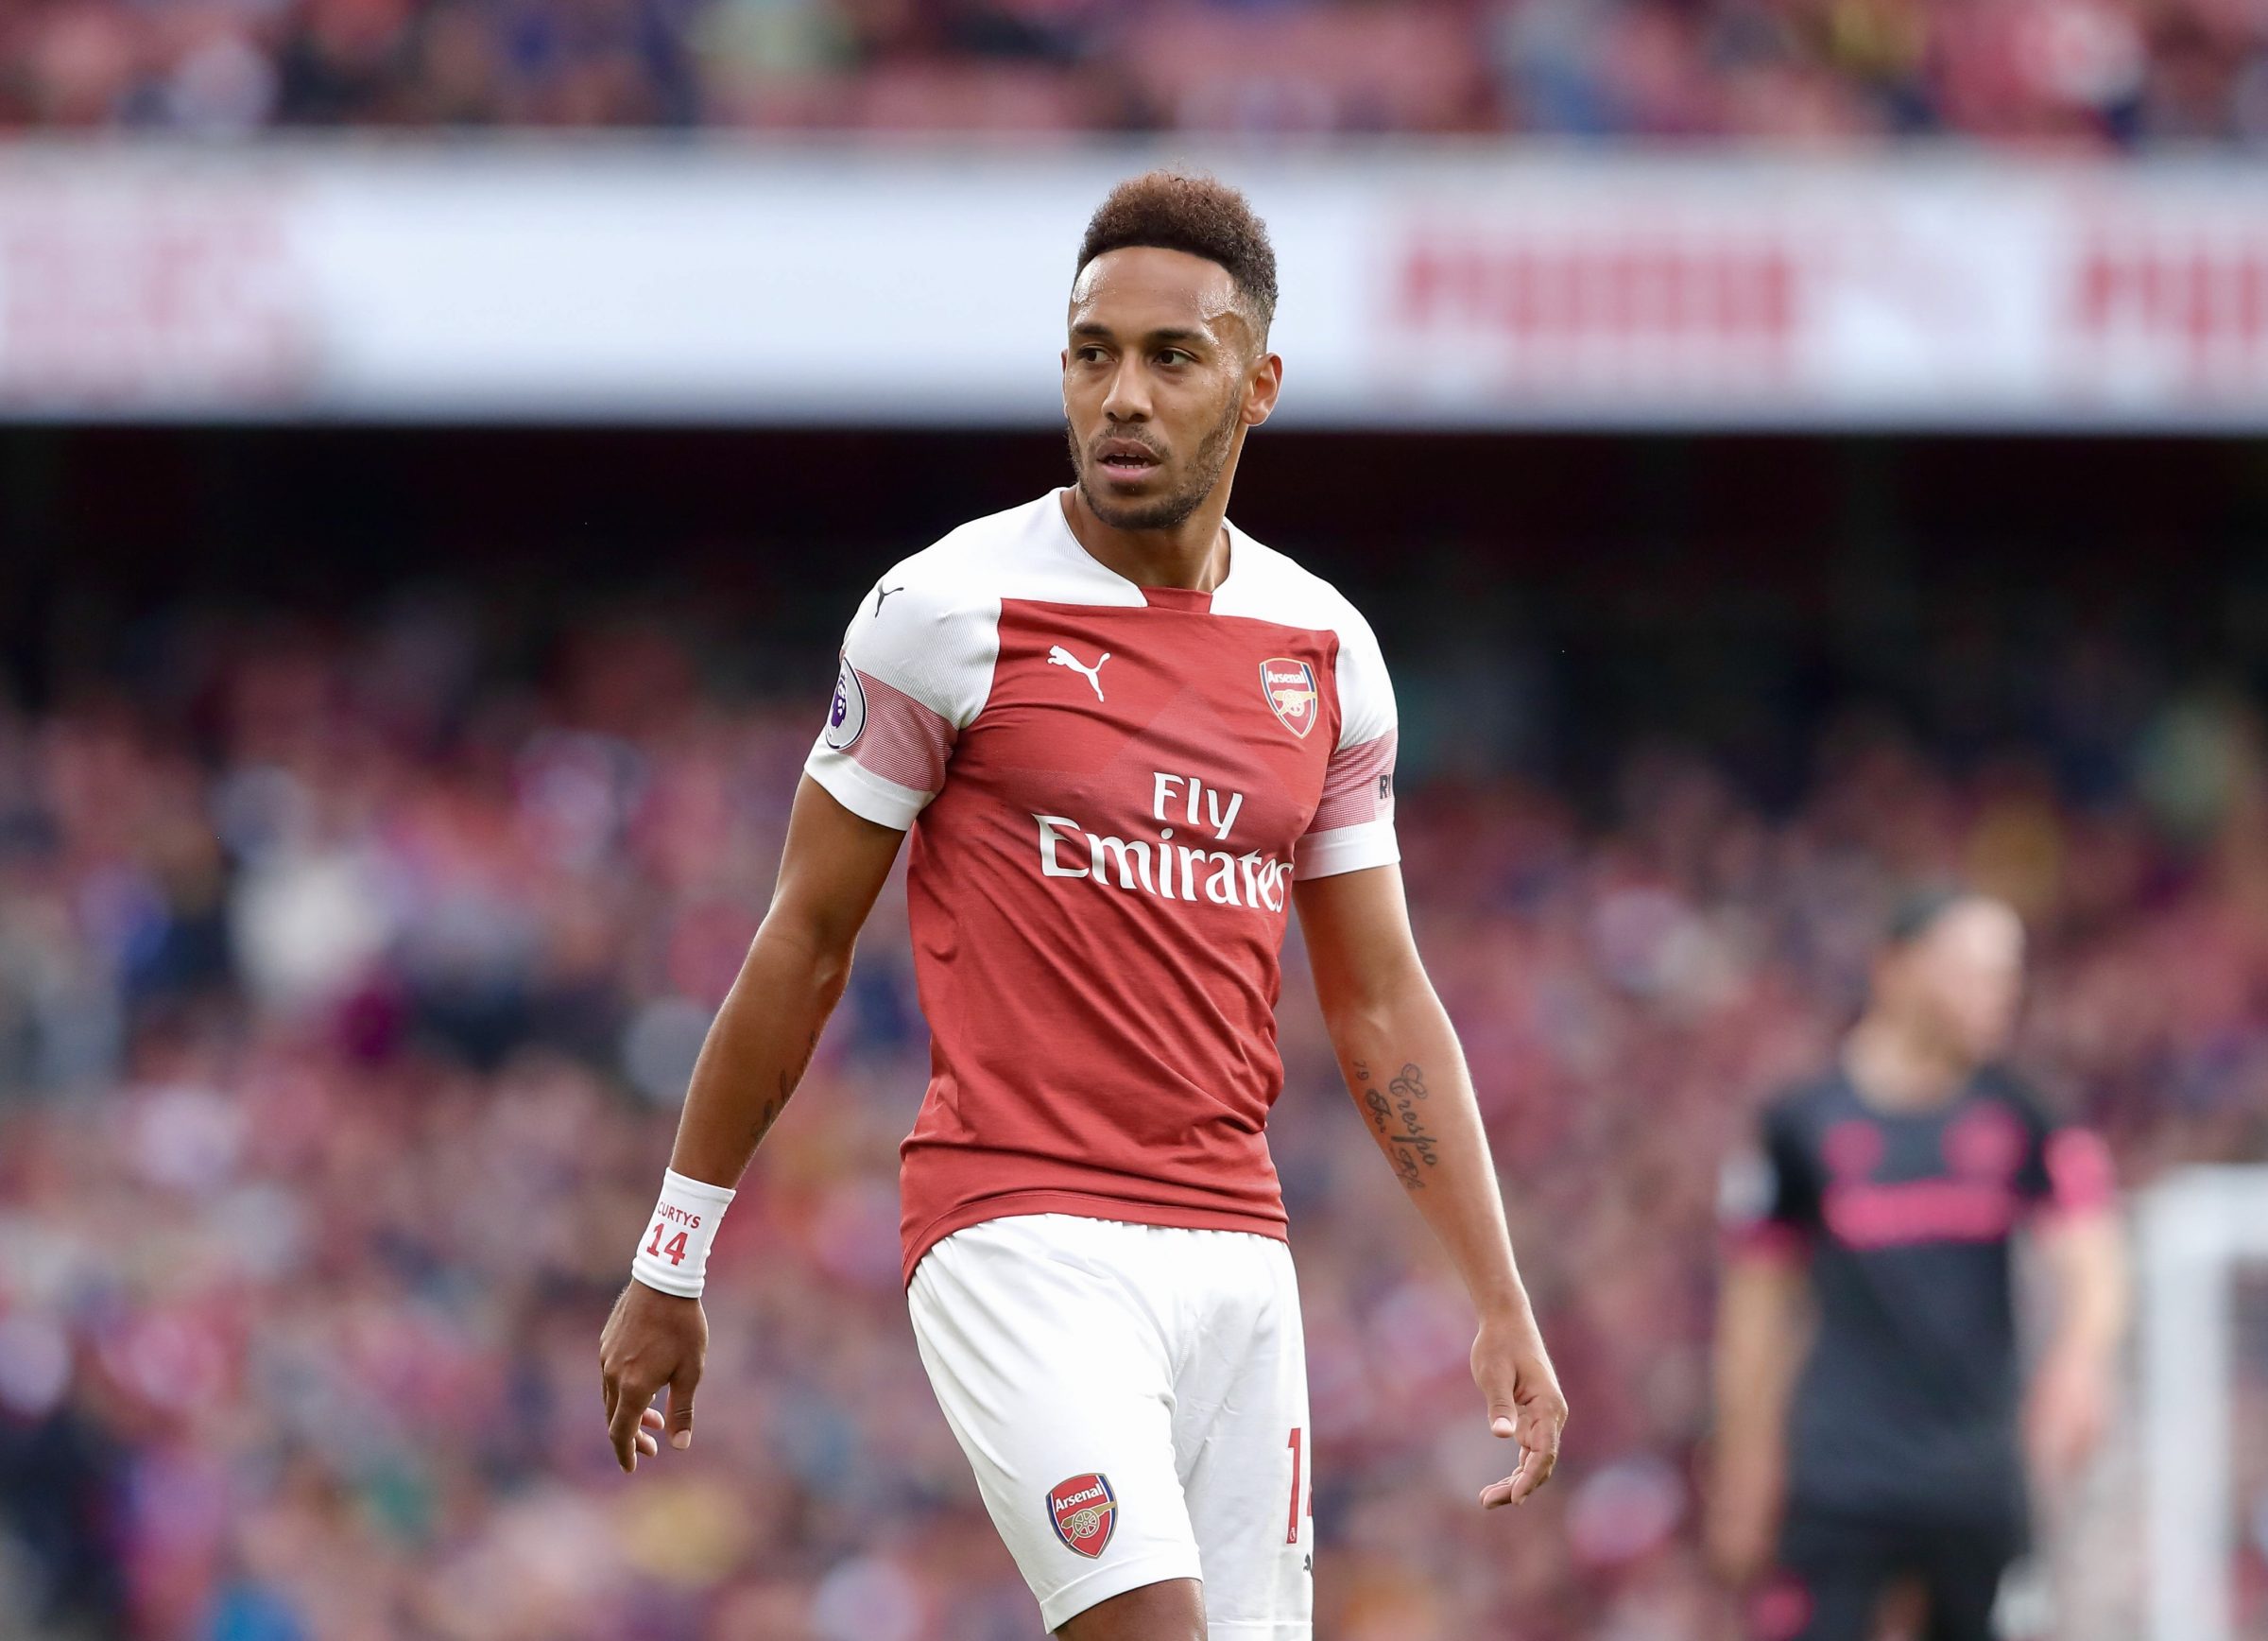 Fans staggered by Pierre-Emerick Aubameyang's new look as he